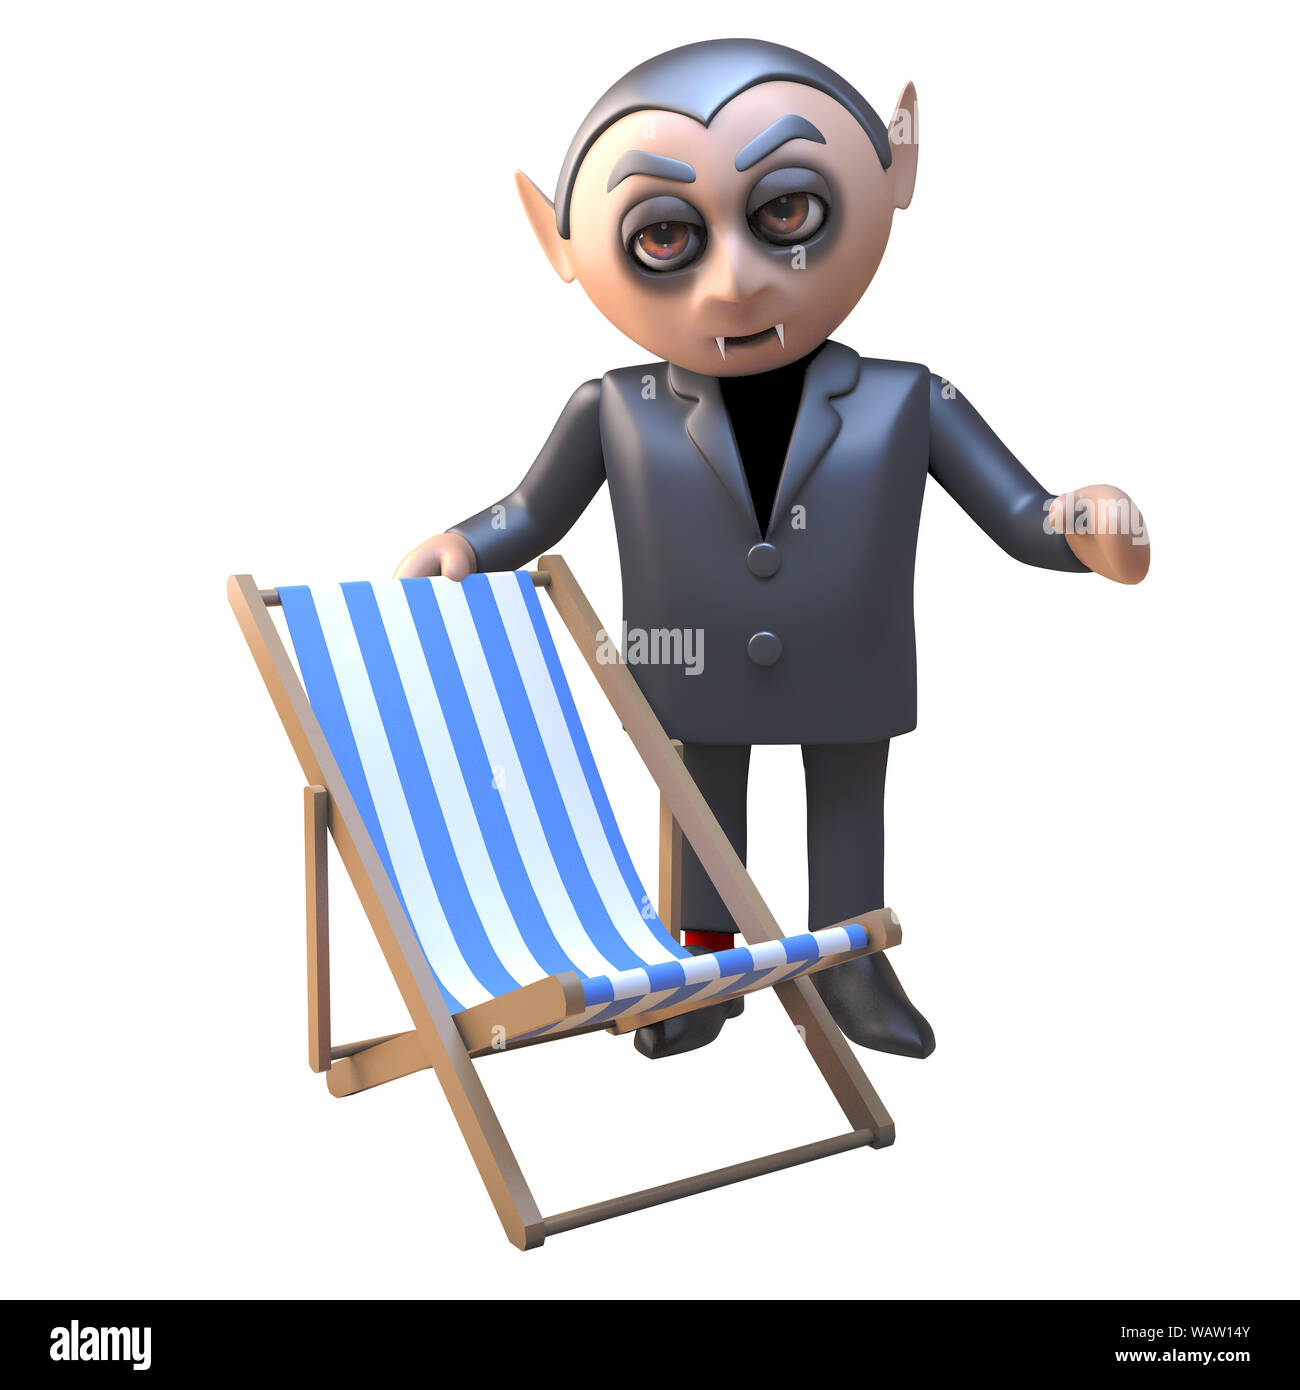 Funny 3d cartoon vampire dracula character offers his deckchair, 3d  illustration render Stock Photo - Alamy